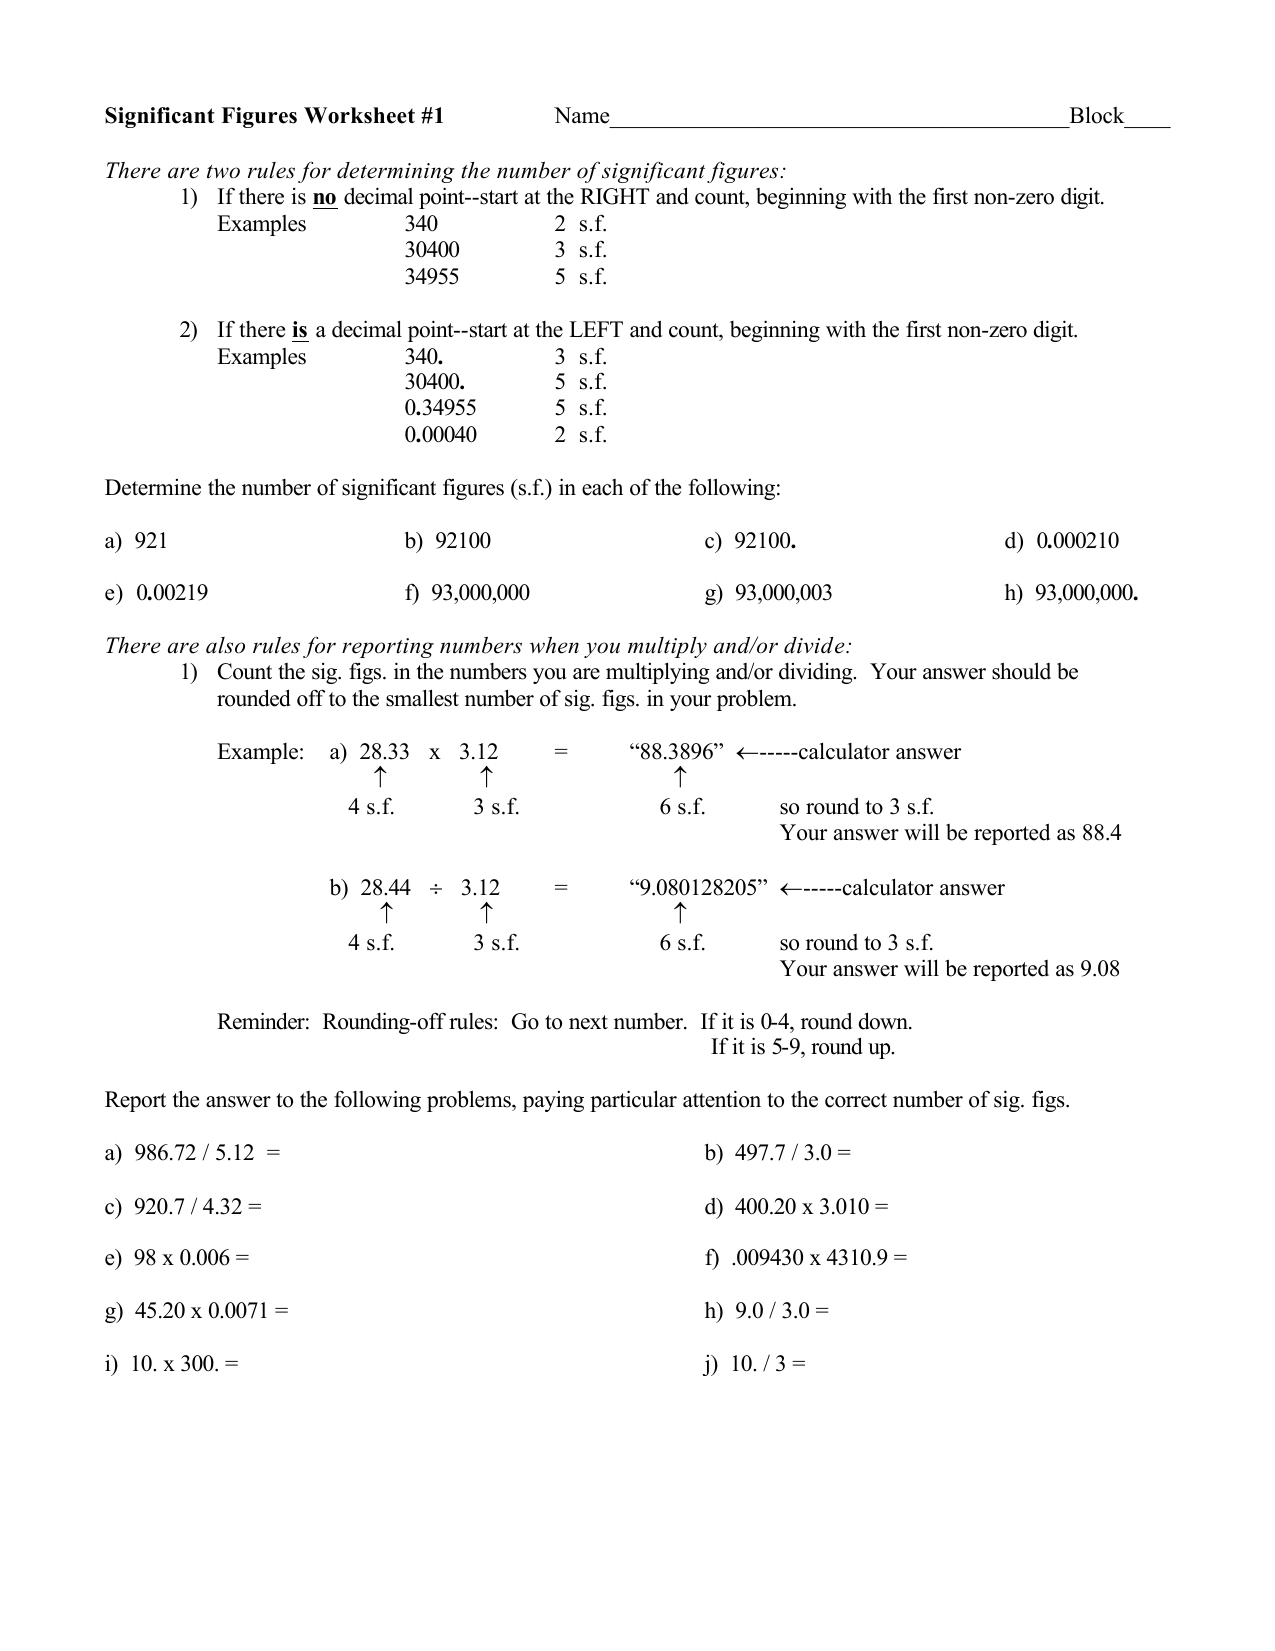 Significant Figures Worksheet #23 Throughout Significant Figures Practice Worksheet